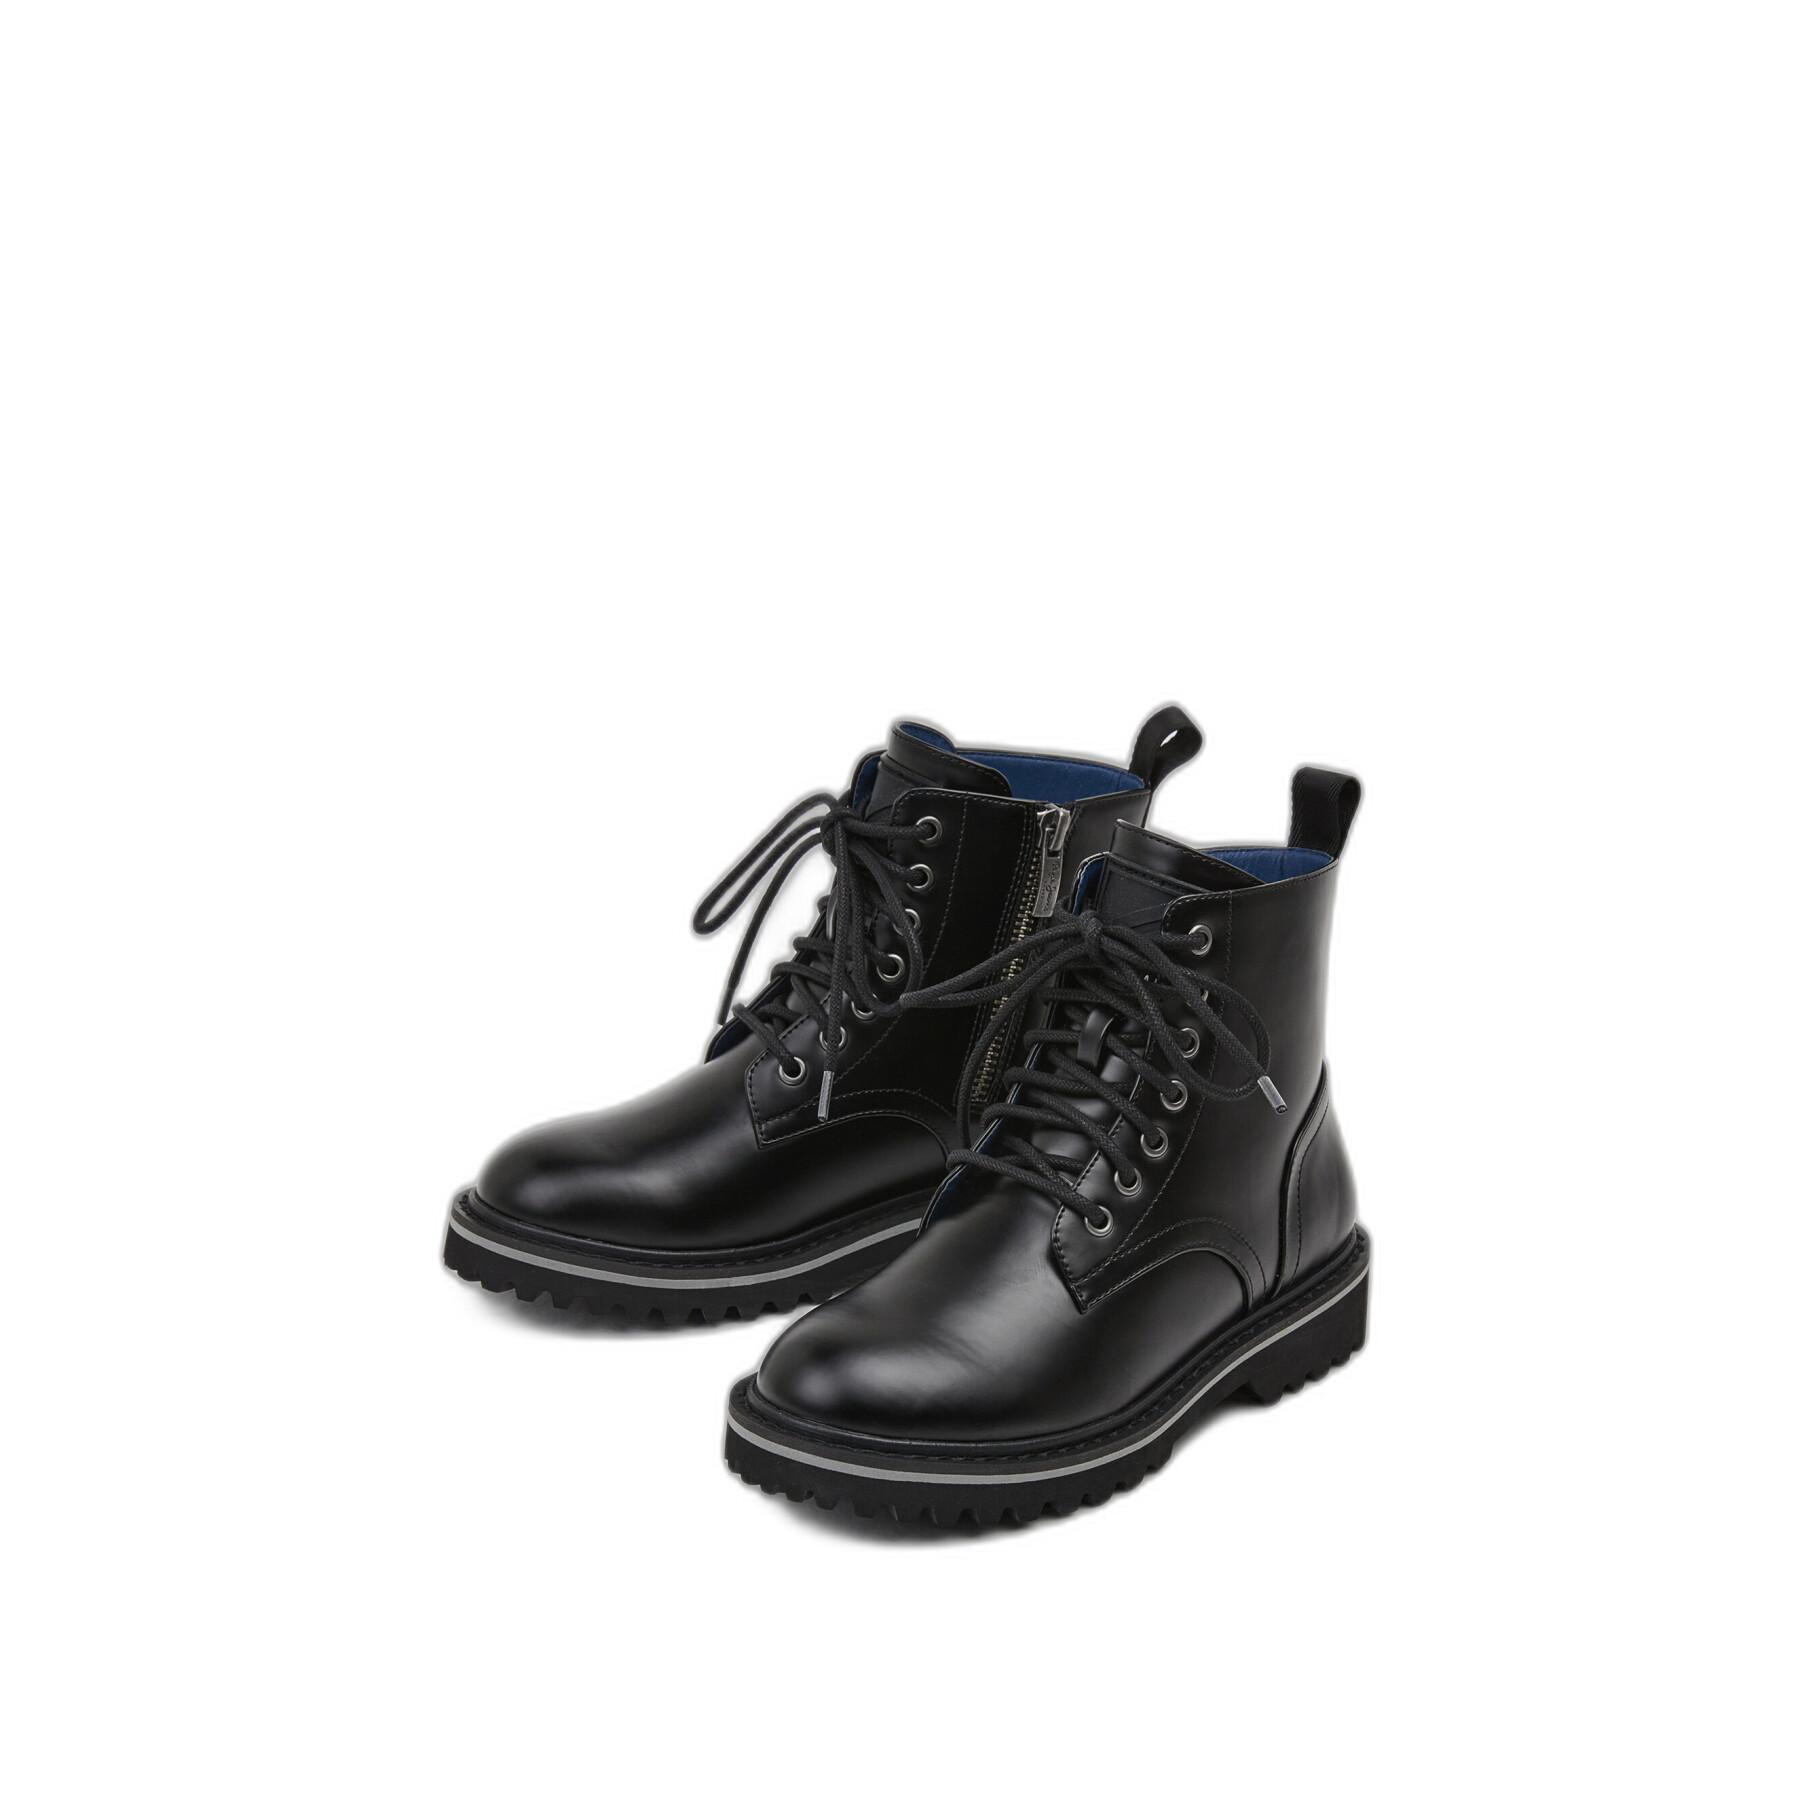 Children's lace-up boots Pepe Jeans Leia